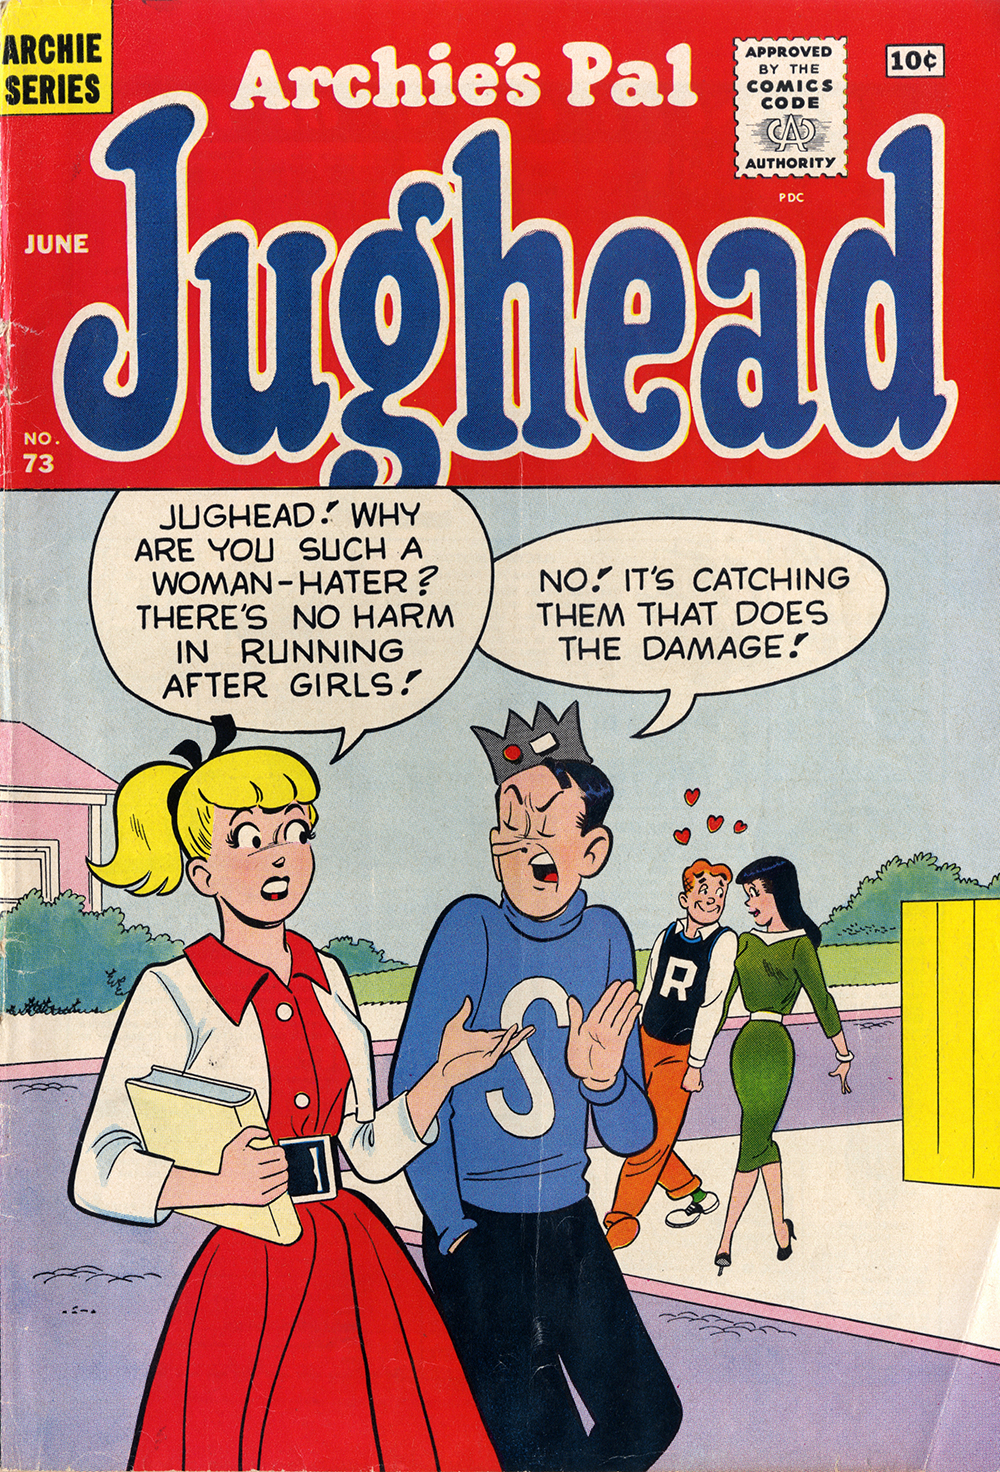 Read online Archie's Pal Jughead comic -  Issue #73 - 1